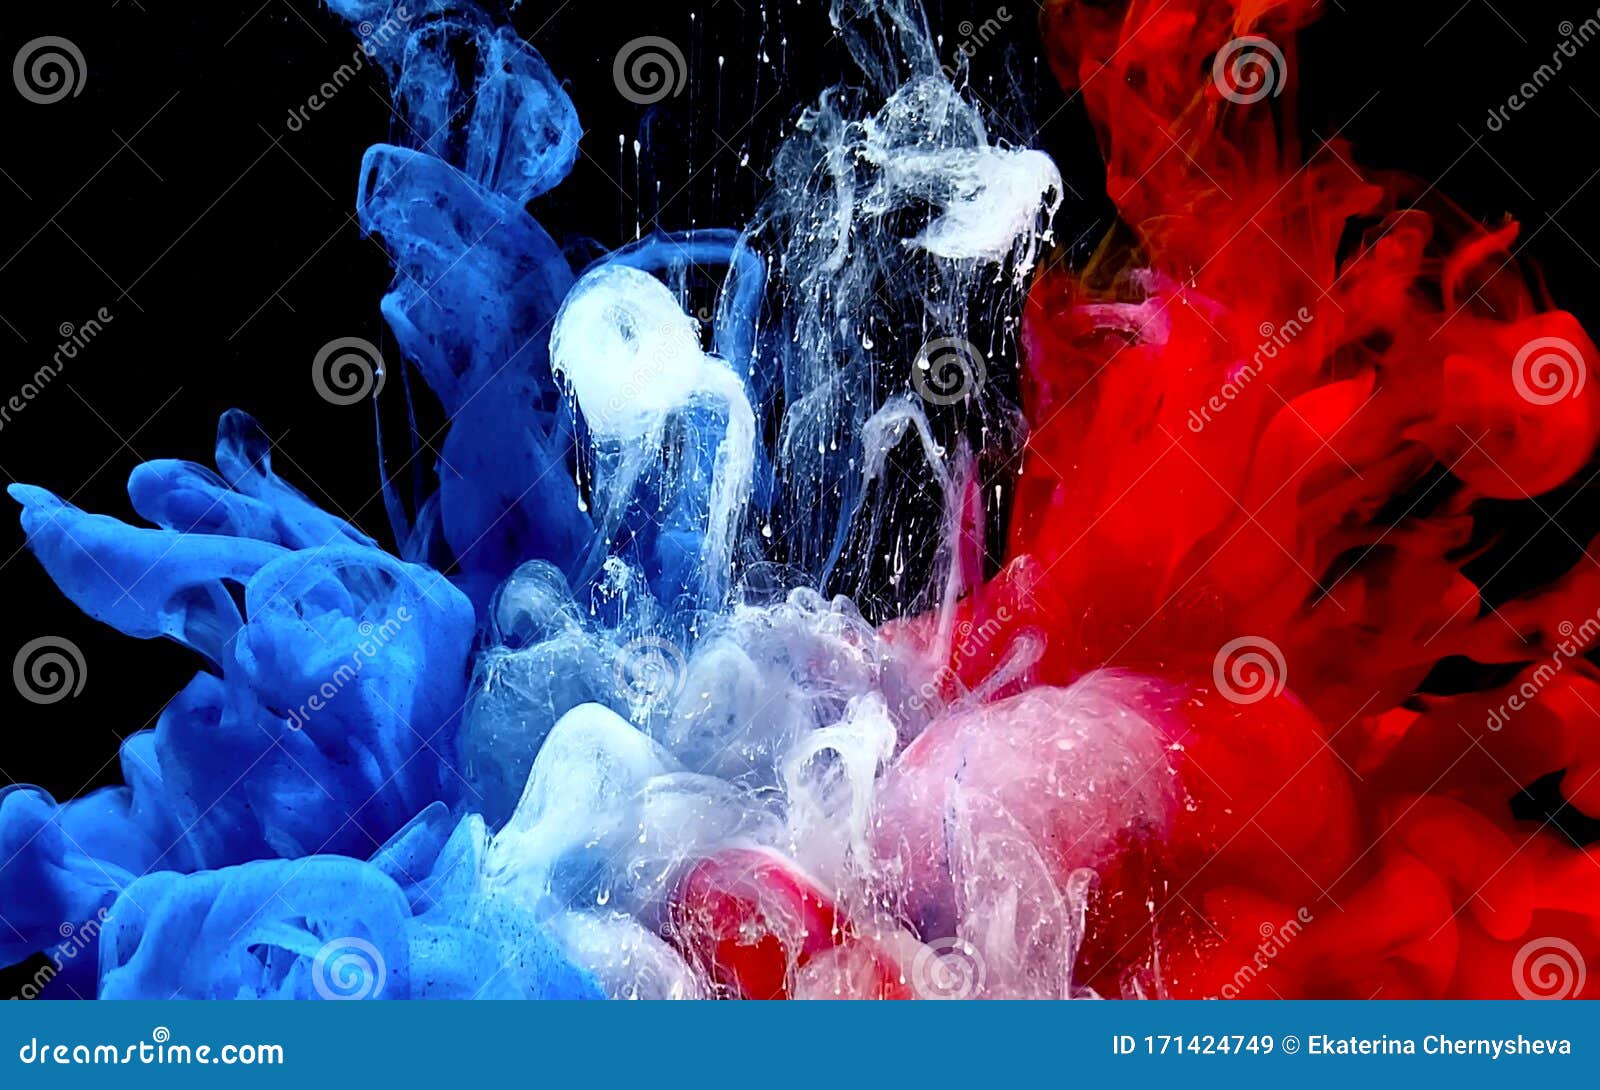 Blue, White and Red Watercolor Ink in Water. France Flag Made of Colored Ink on a Black Background Stock Image - Image of explosion,